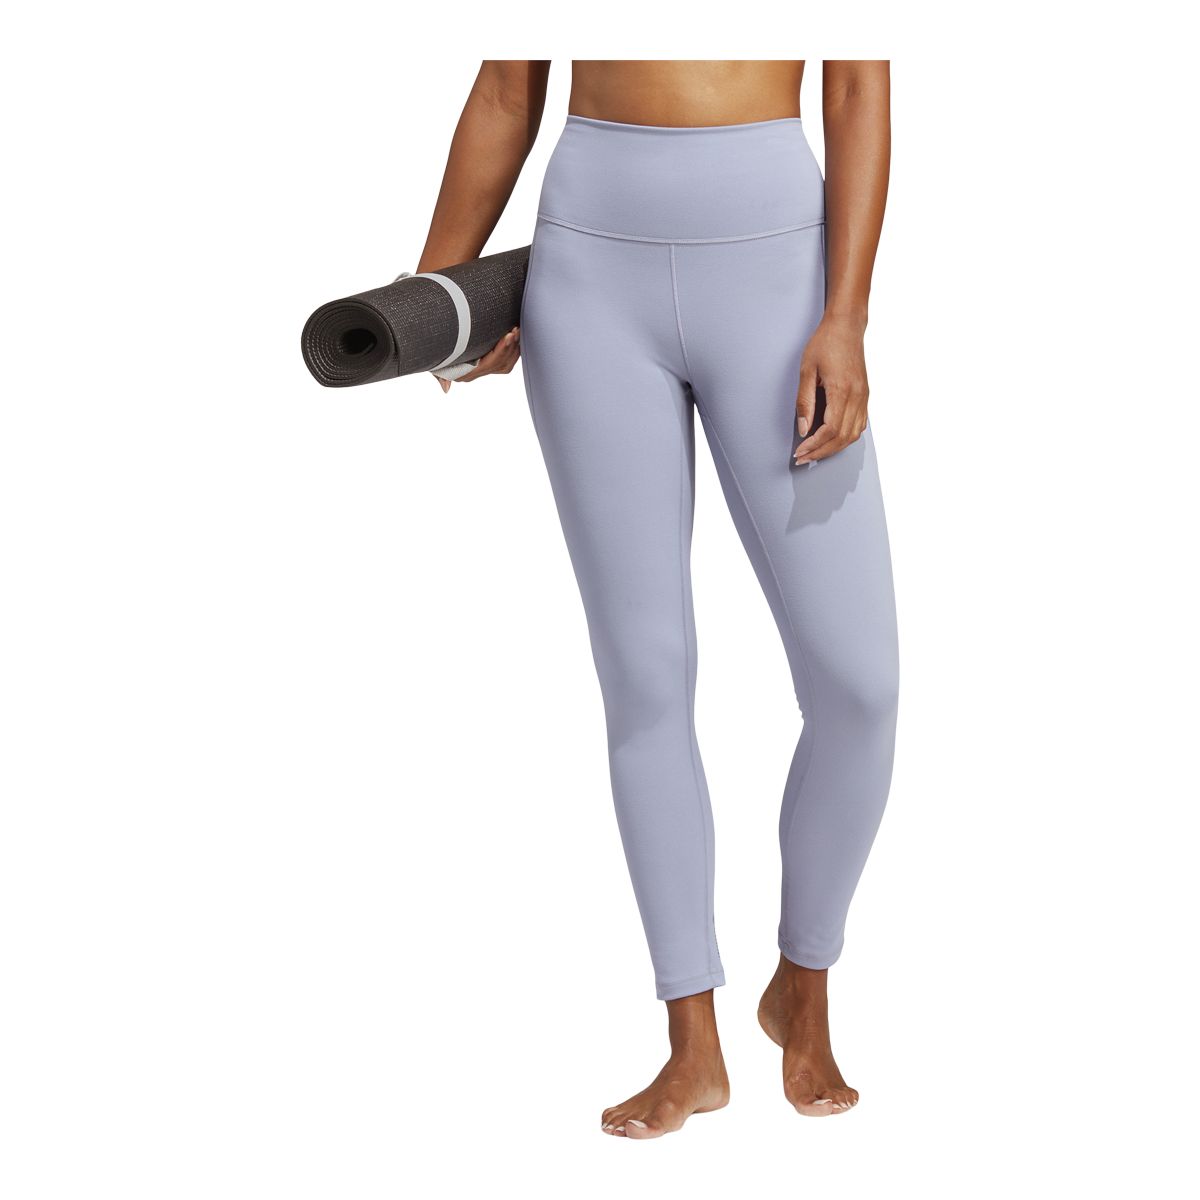 Adidas Yoga Studio 7/8 Tight Womens - Buy Online - Ph: 1800-370-766 -  AfterPay & ZipPay Available!